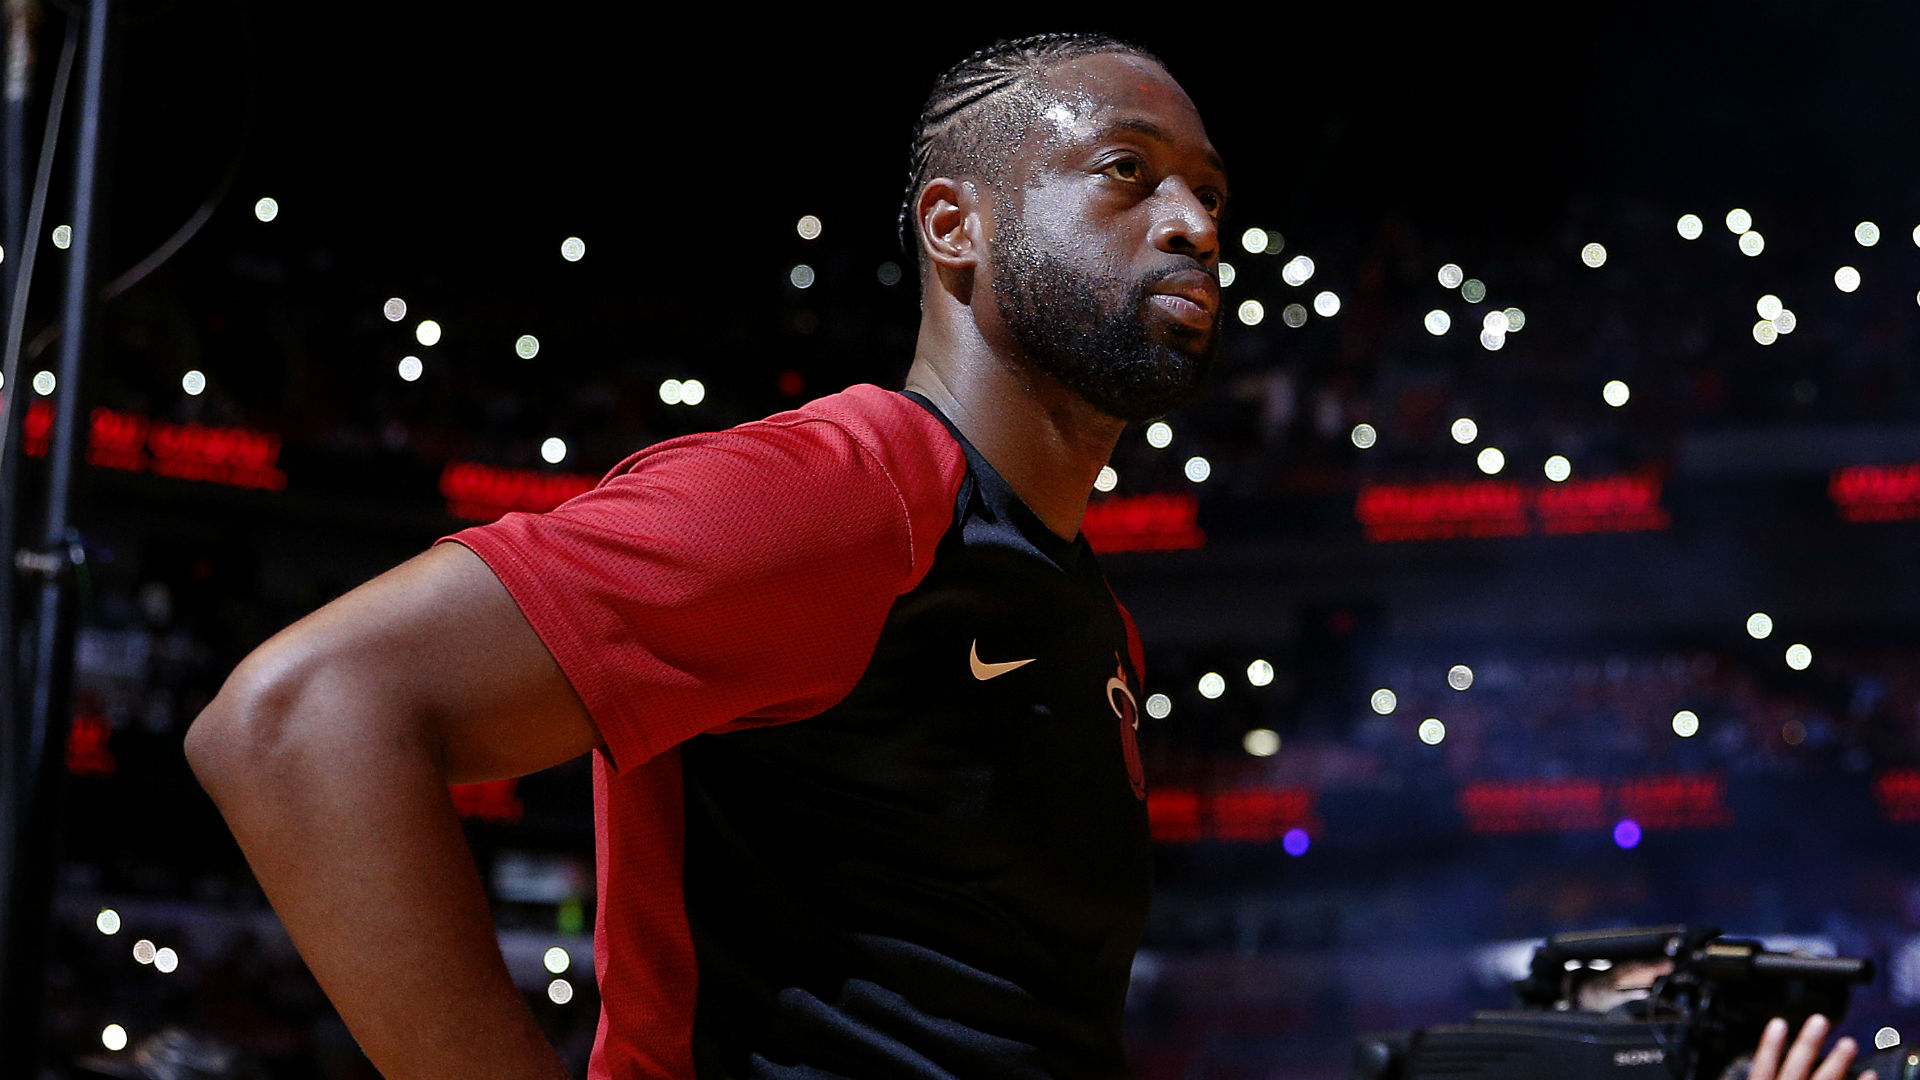 Miami Heat star Dwyane Wade was once sceptical of the idea of seeing a therapist but now plans to do so after retirement.